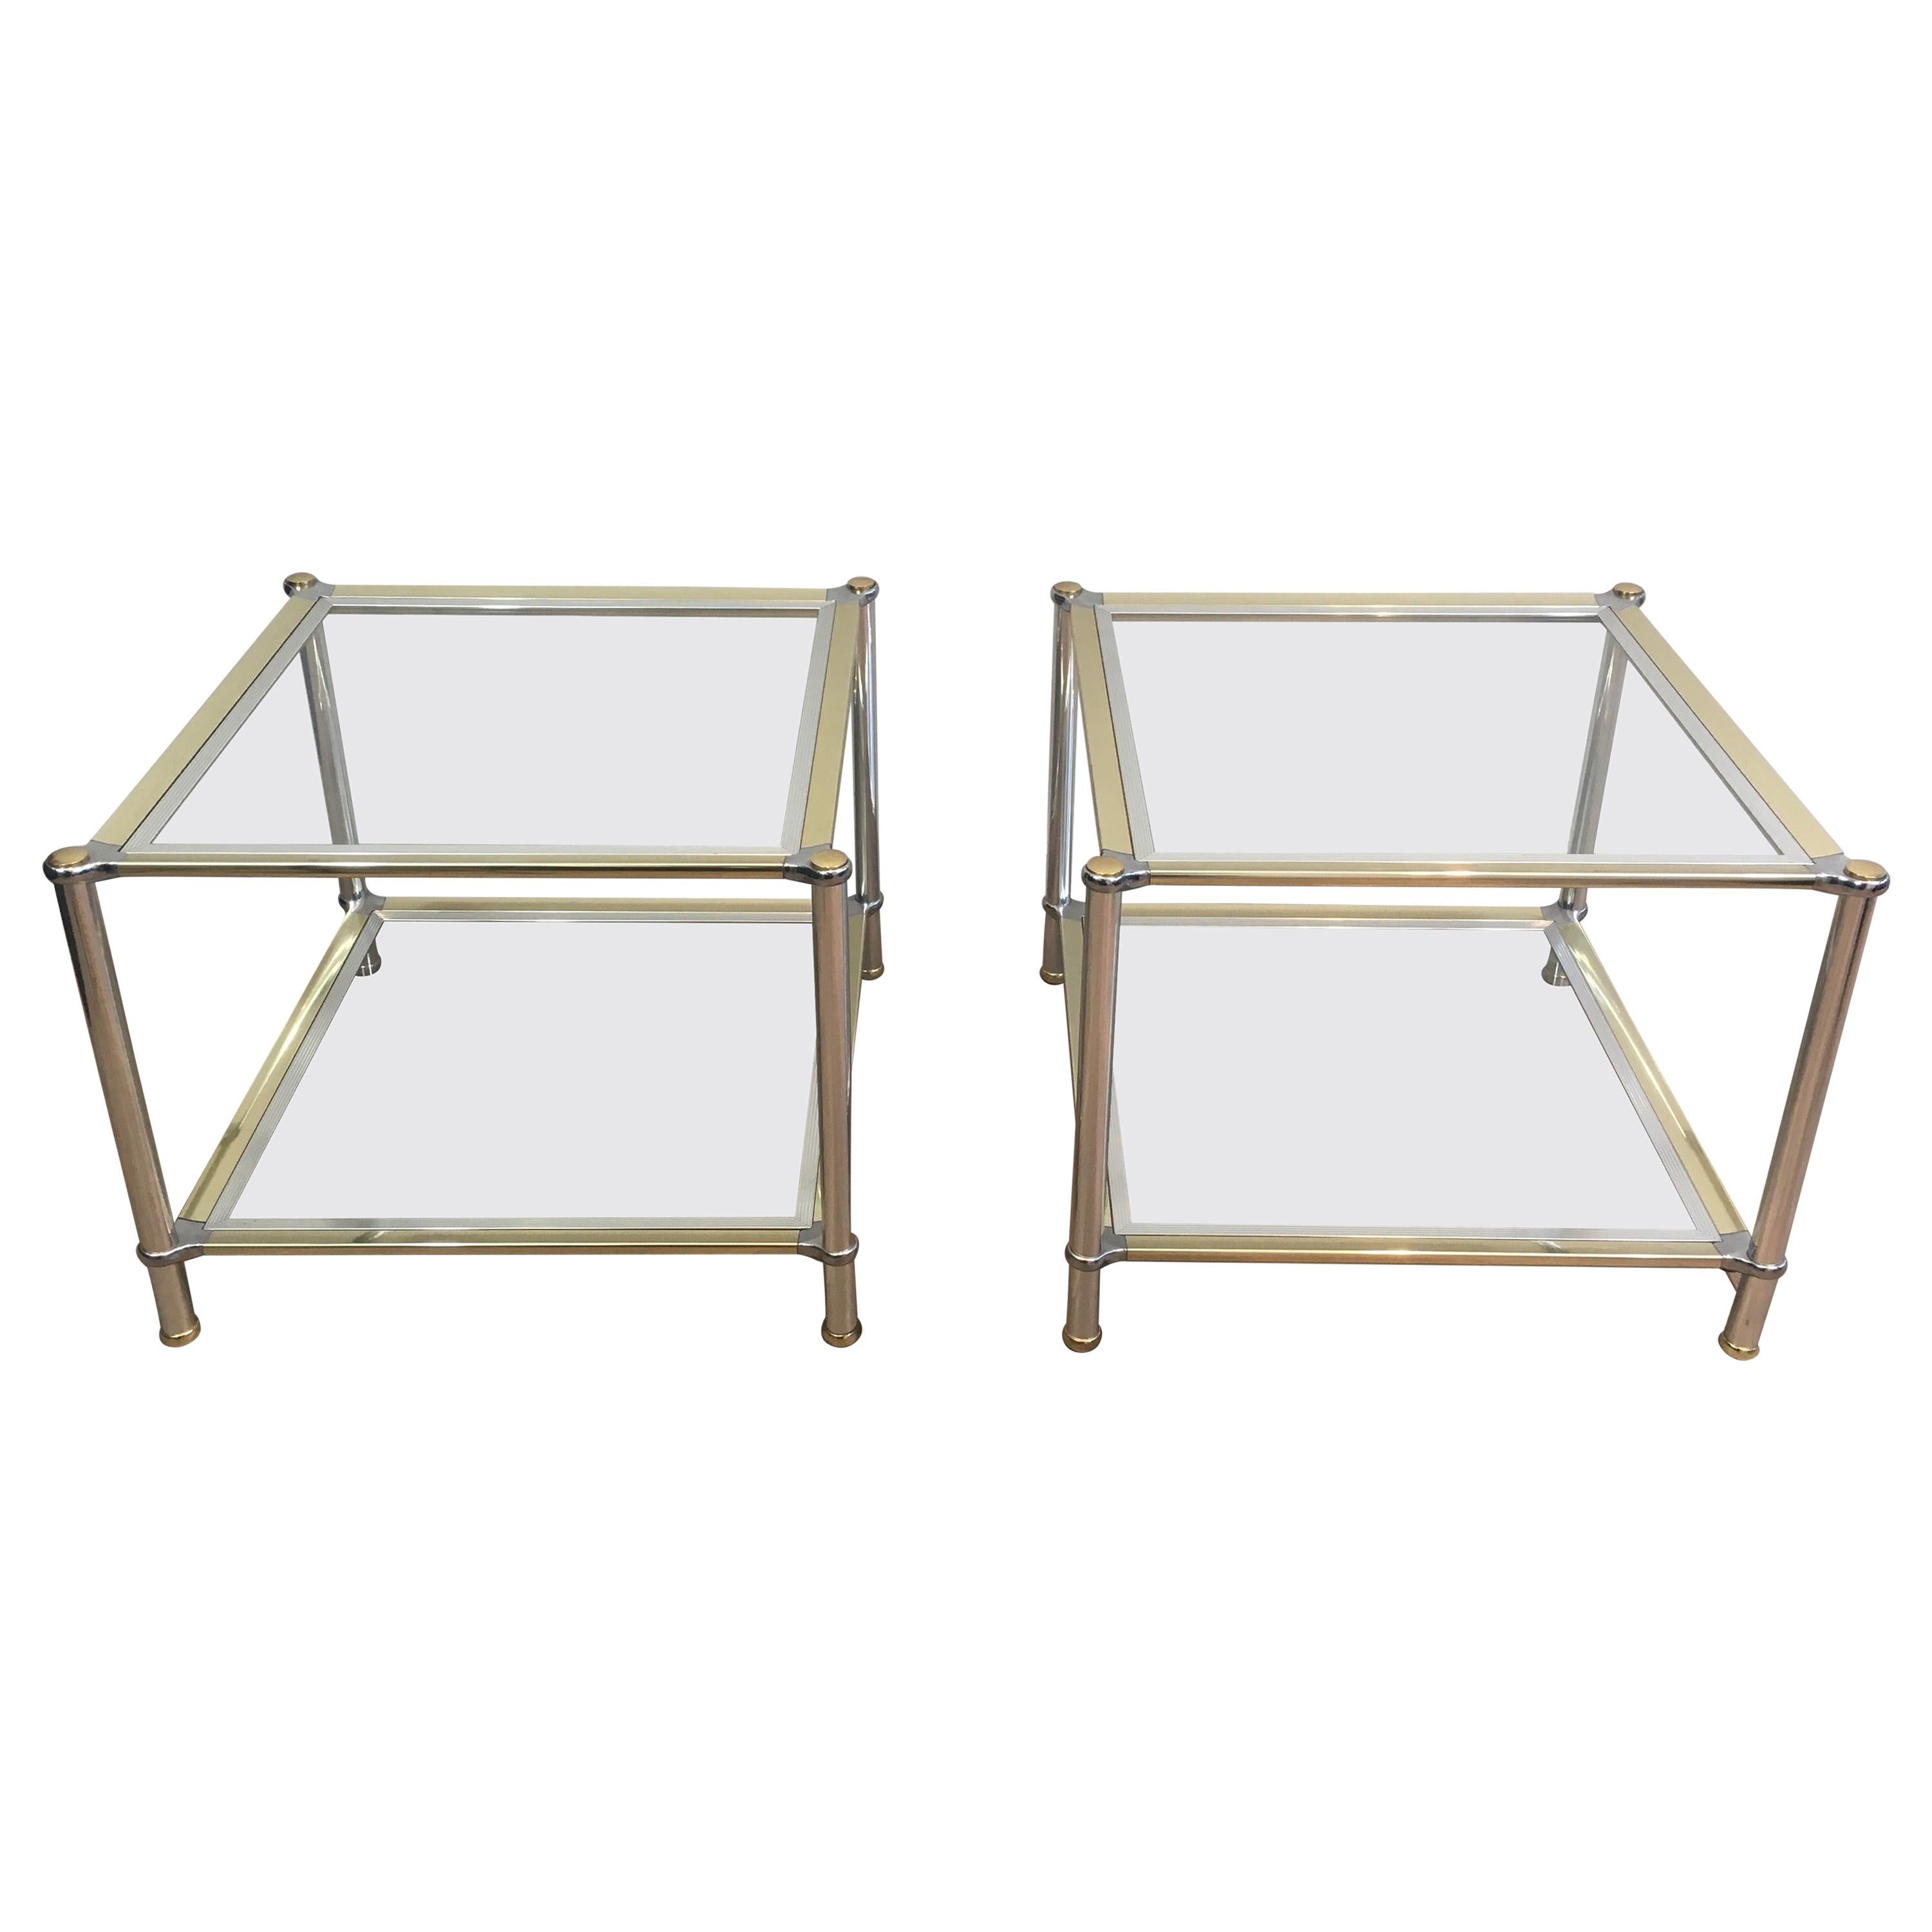 Pair of Chrome, Gilt and Silver Metal Side Tables, French, circa 1970